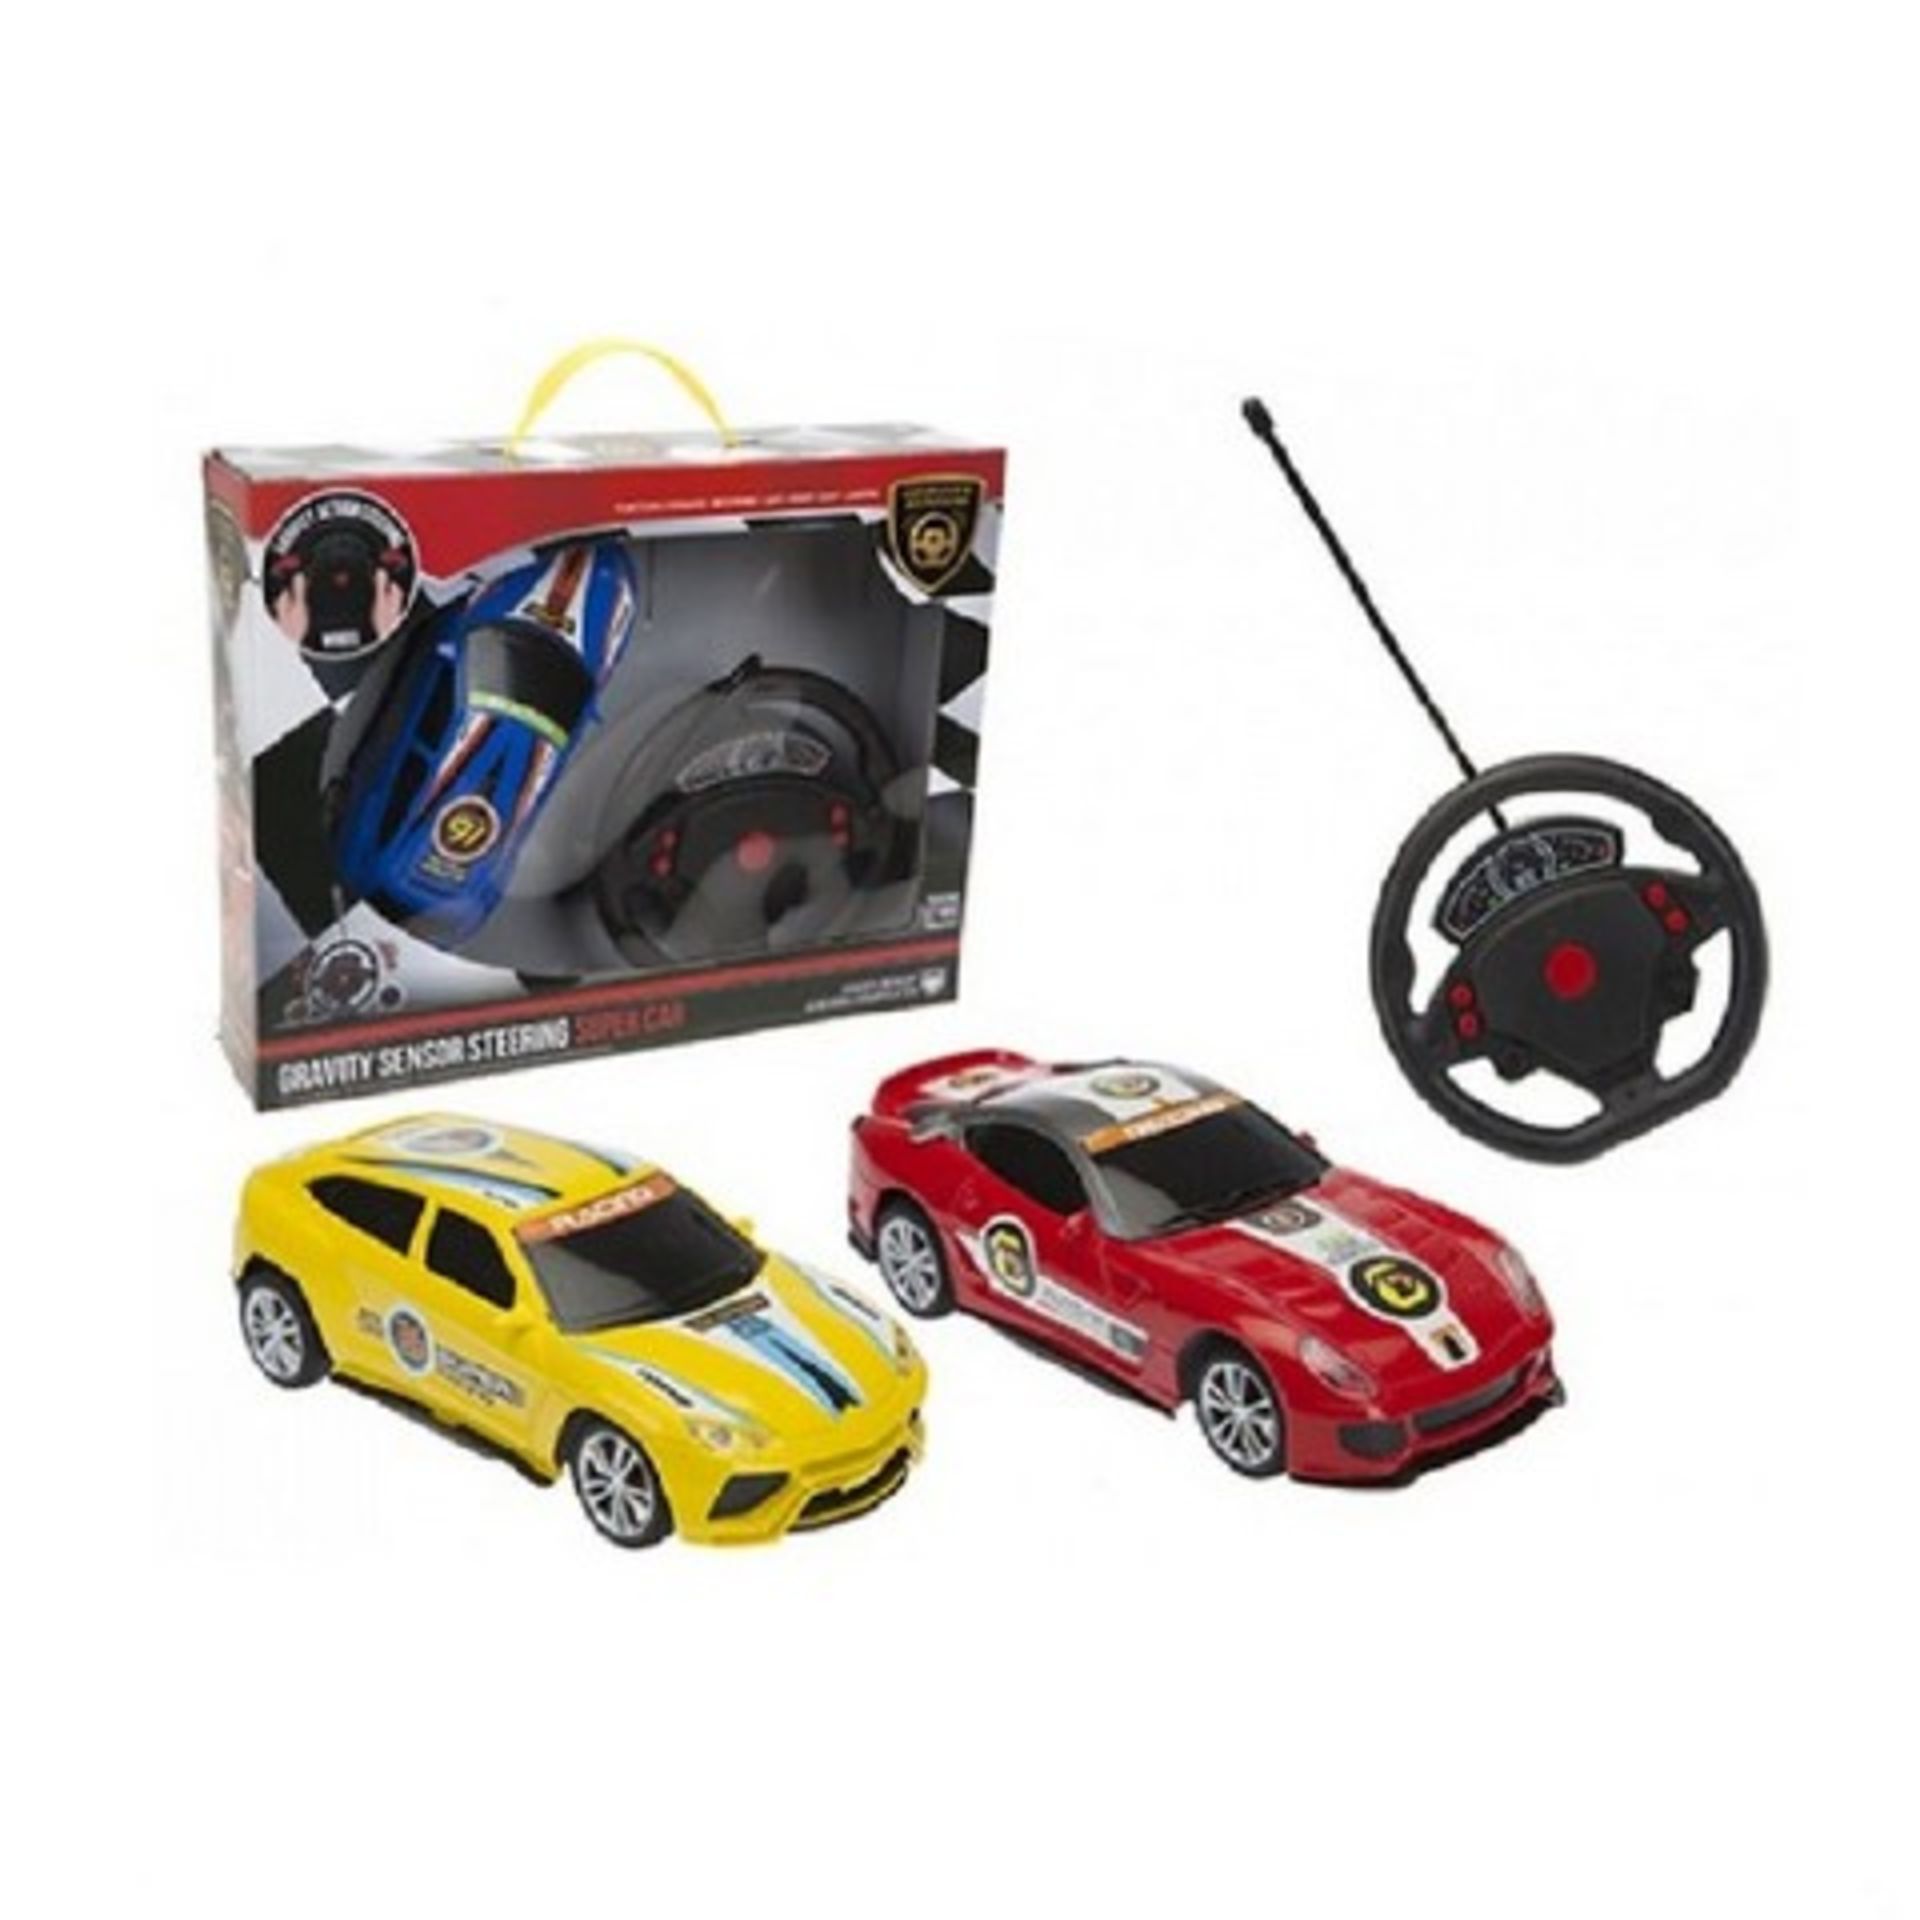 V Brand New Remote Control Gravity Sensor Steering Sports Car With Lights and Steering Wheel -